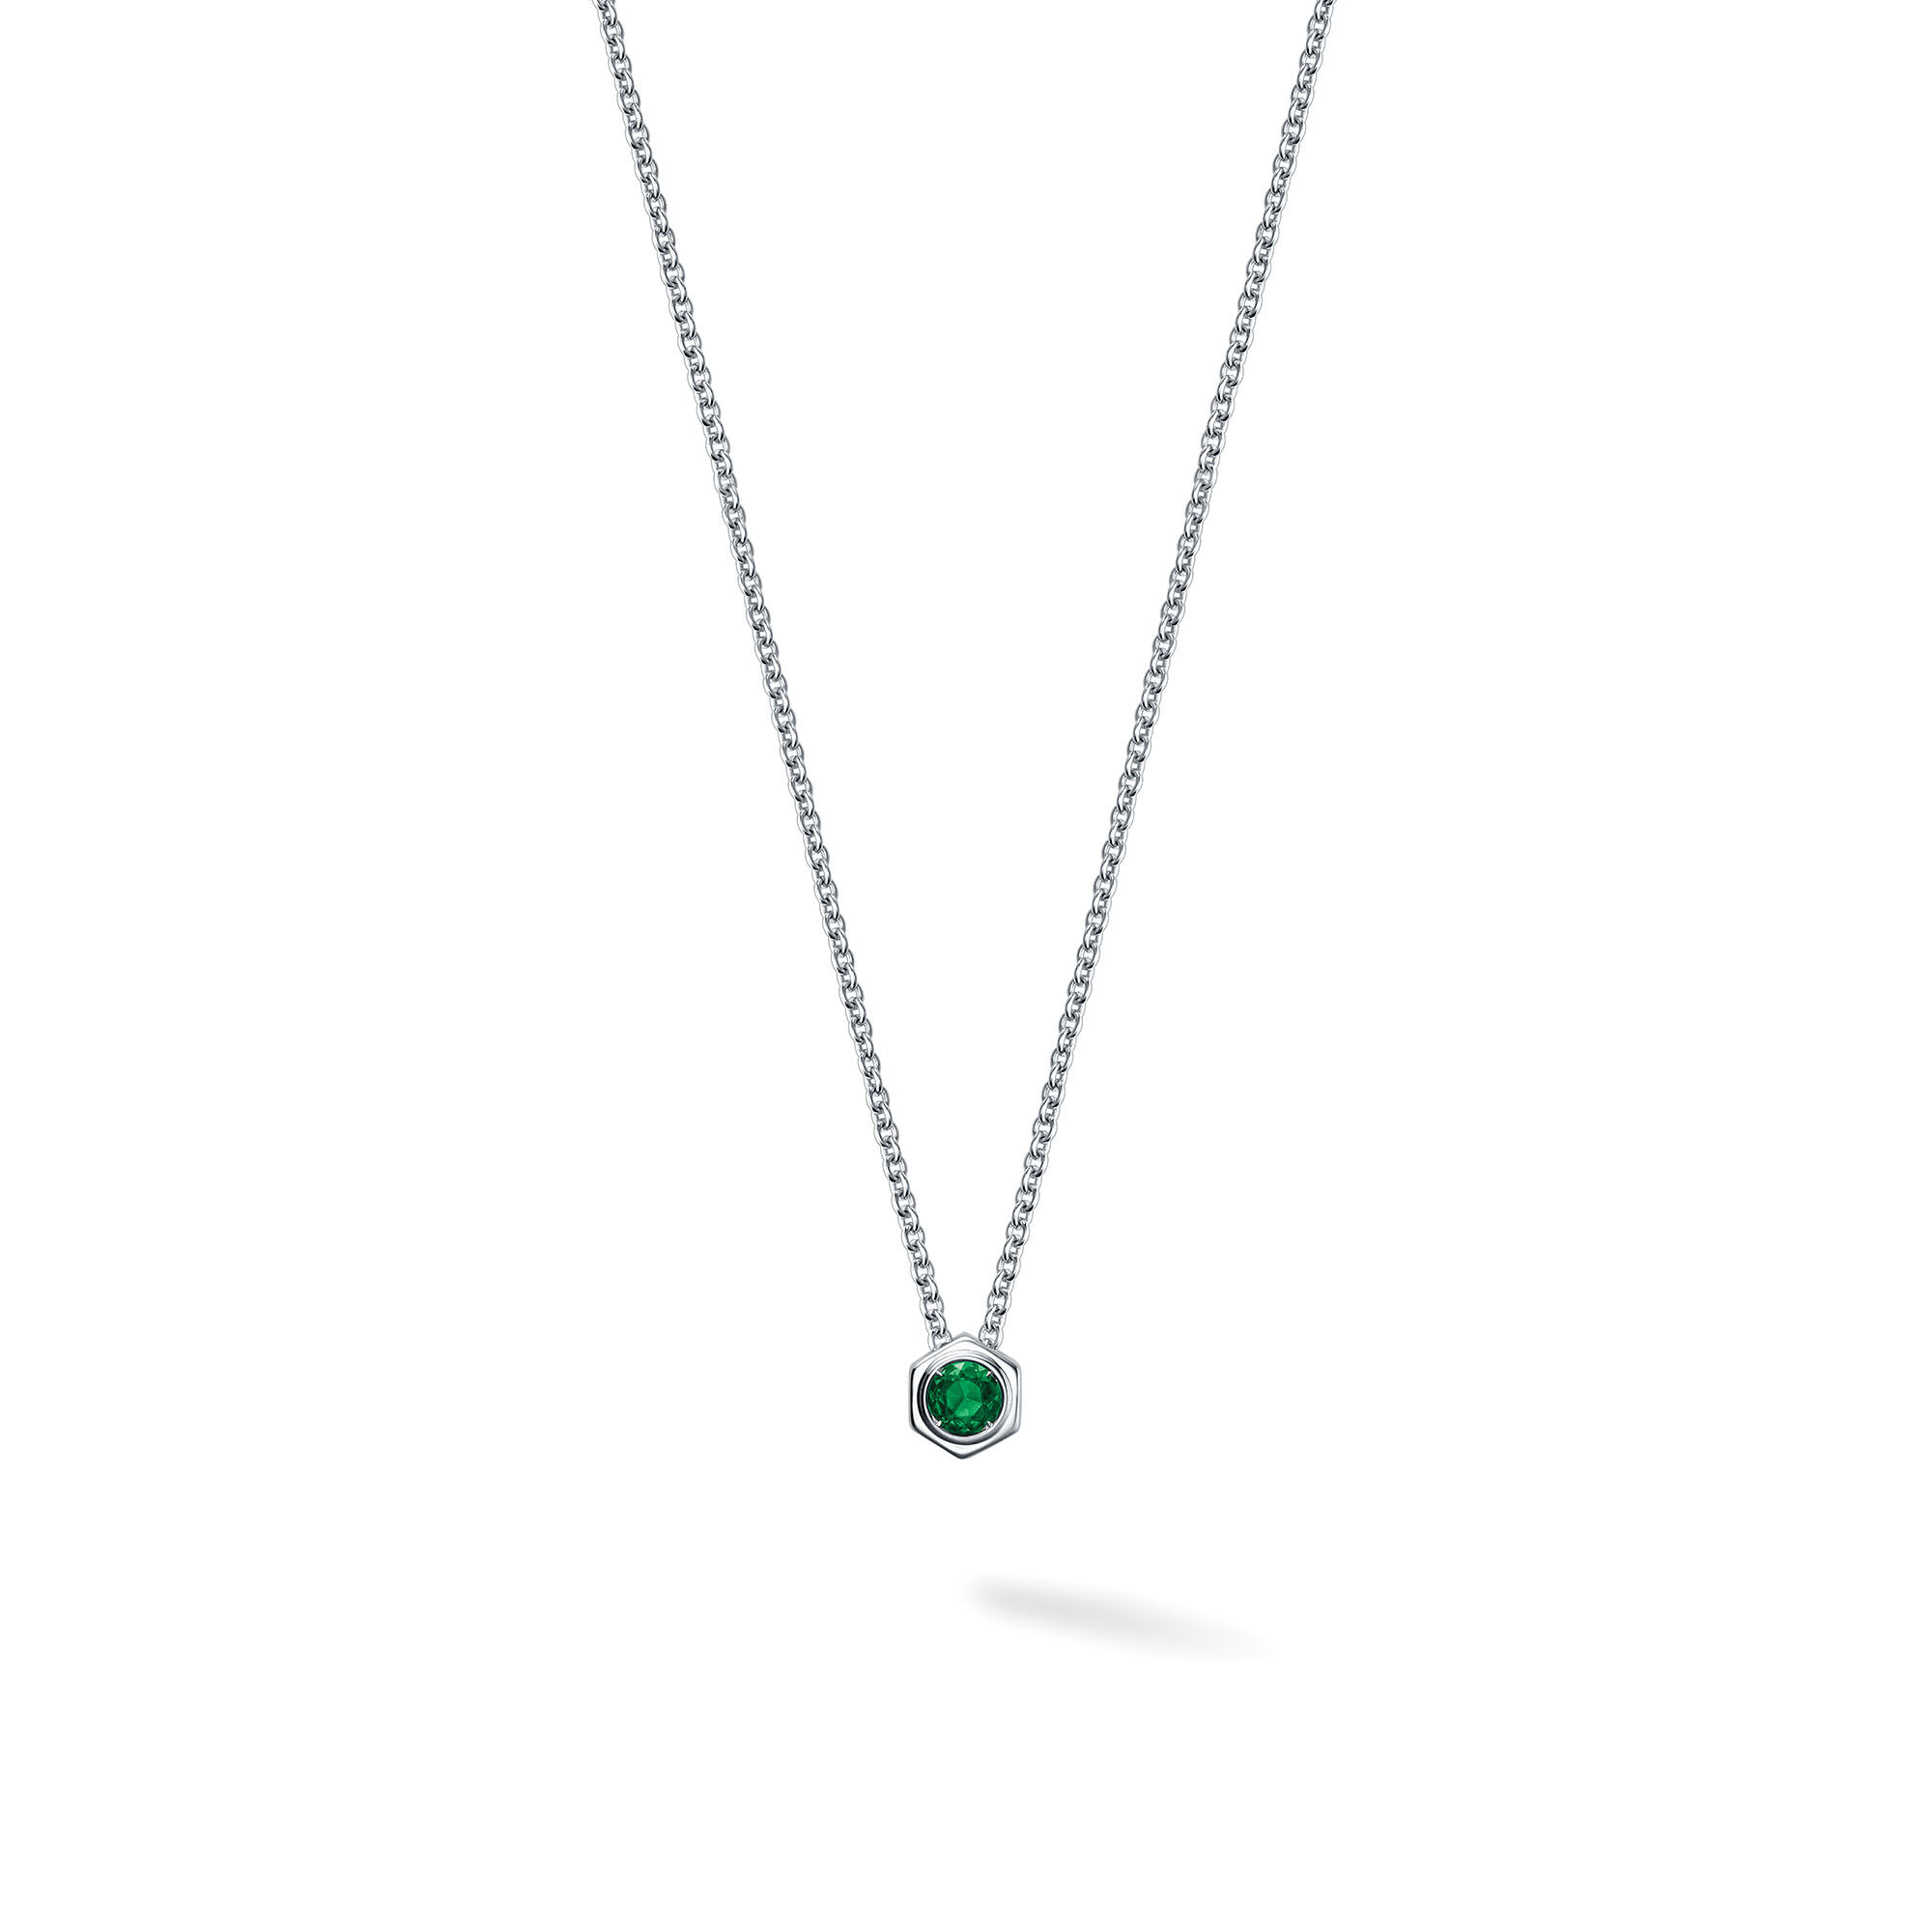 Emerald and Silver Necklace | Birks Bee Chic